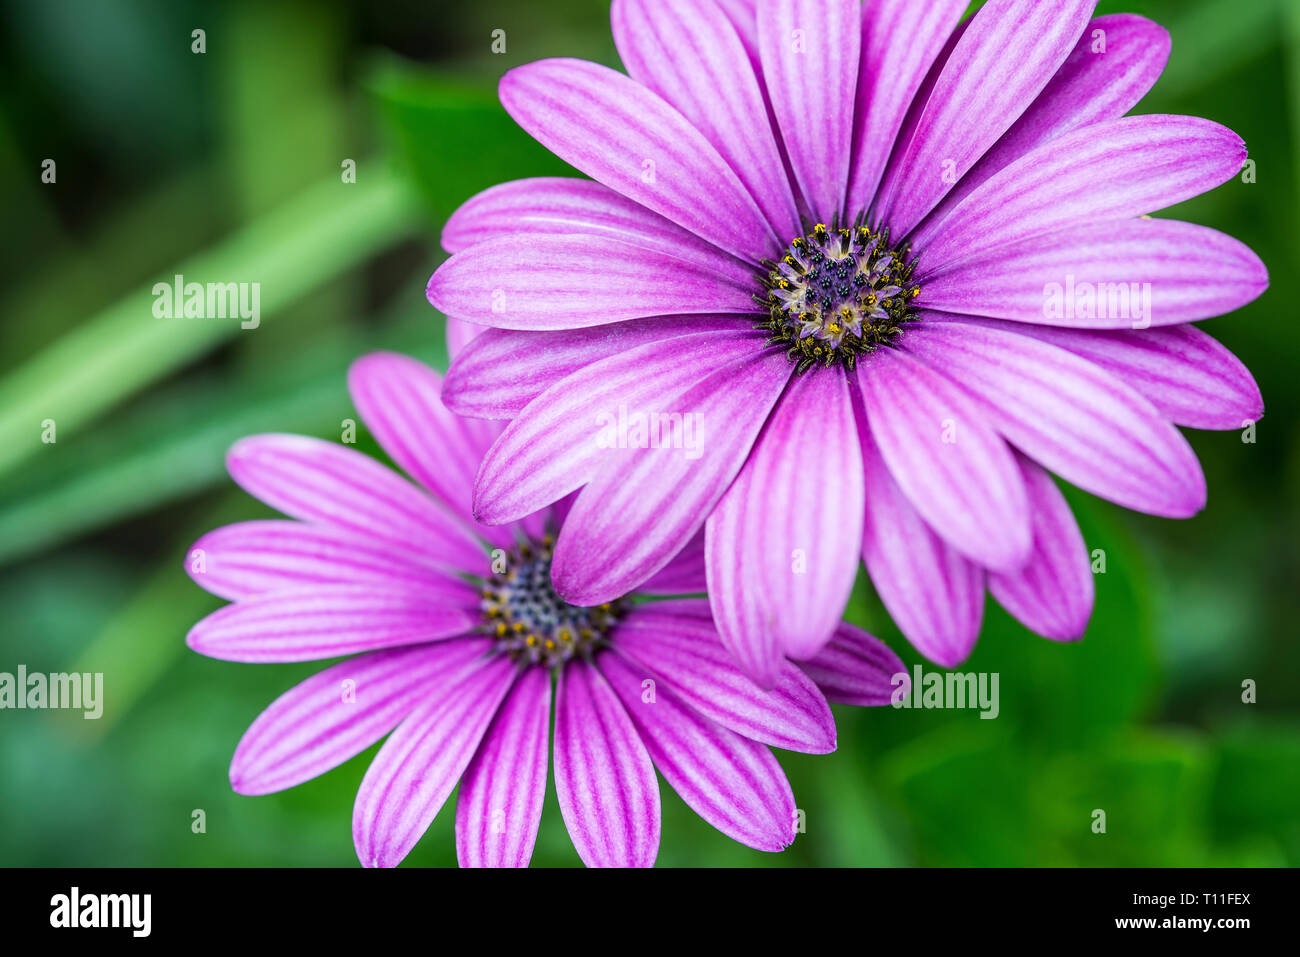 Close up of two flowering, bightly pink African daisy, osteospermum, blurred green background Stock Photo